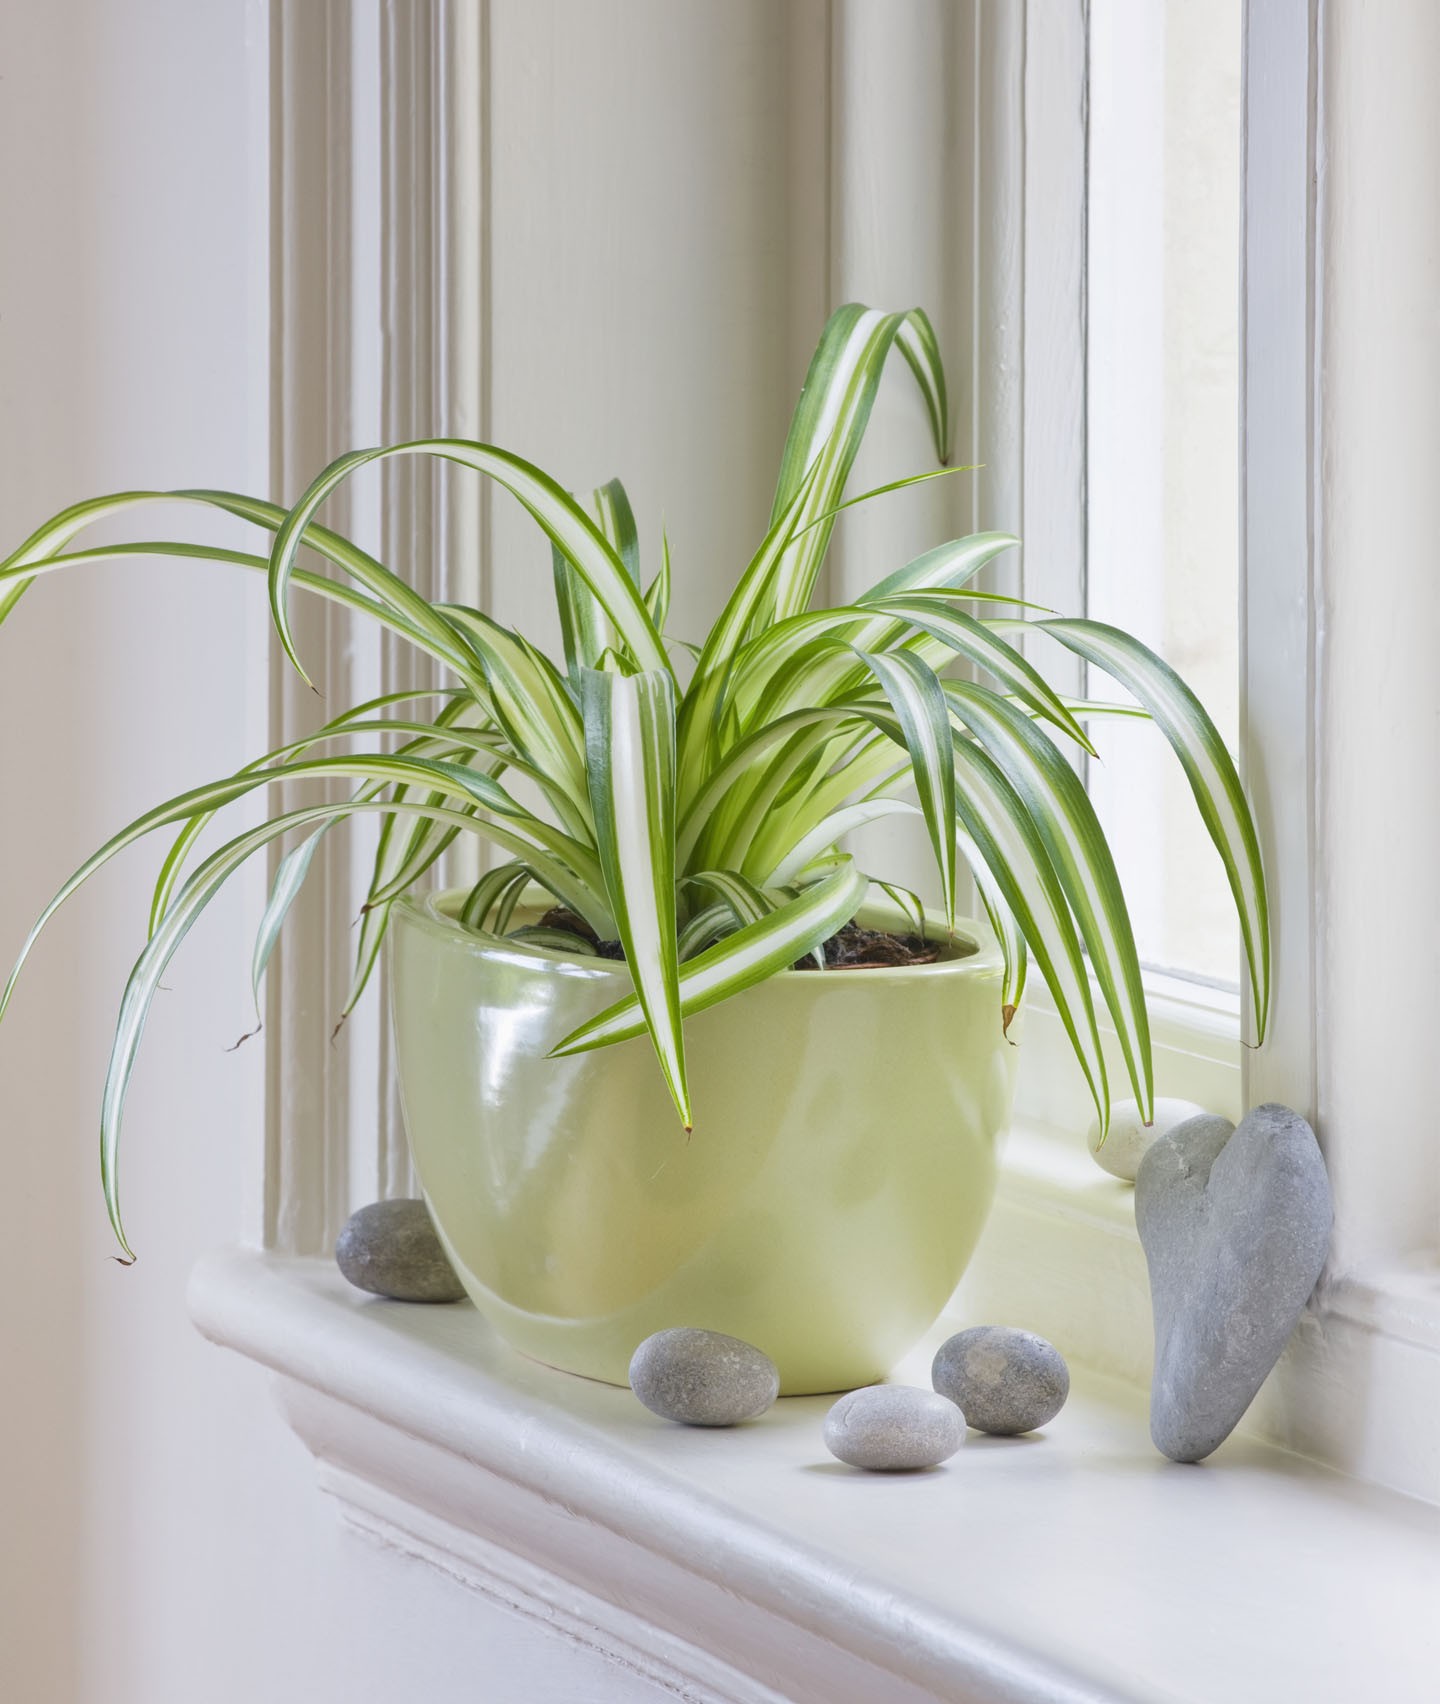 DESIGNER: CLARE MATTHEWS - HOUSEPLANT PROJECT - GREEN CONTAINER ON WINDOWSILL PLANTED WITH SPIDER PLANT - CHLOROPHYTUM COMOSUM (Foto: Getty Images)